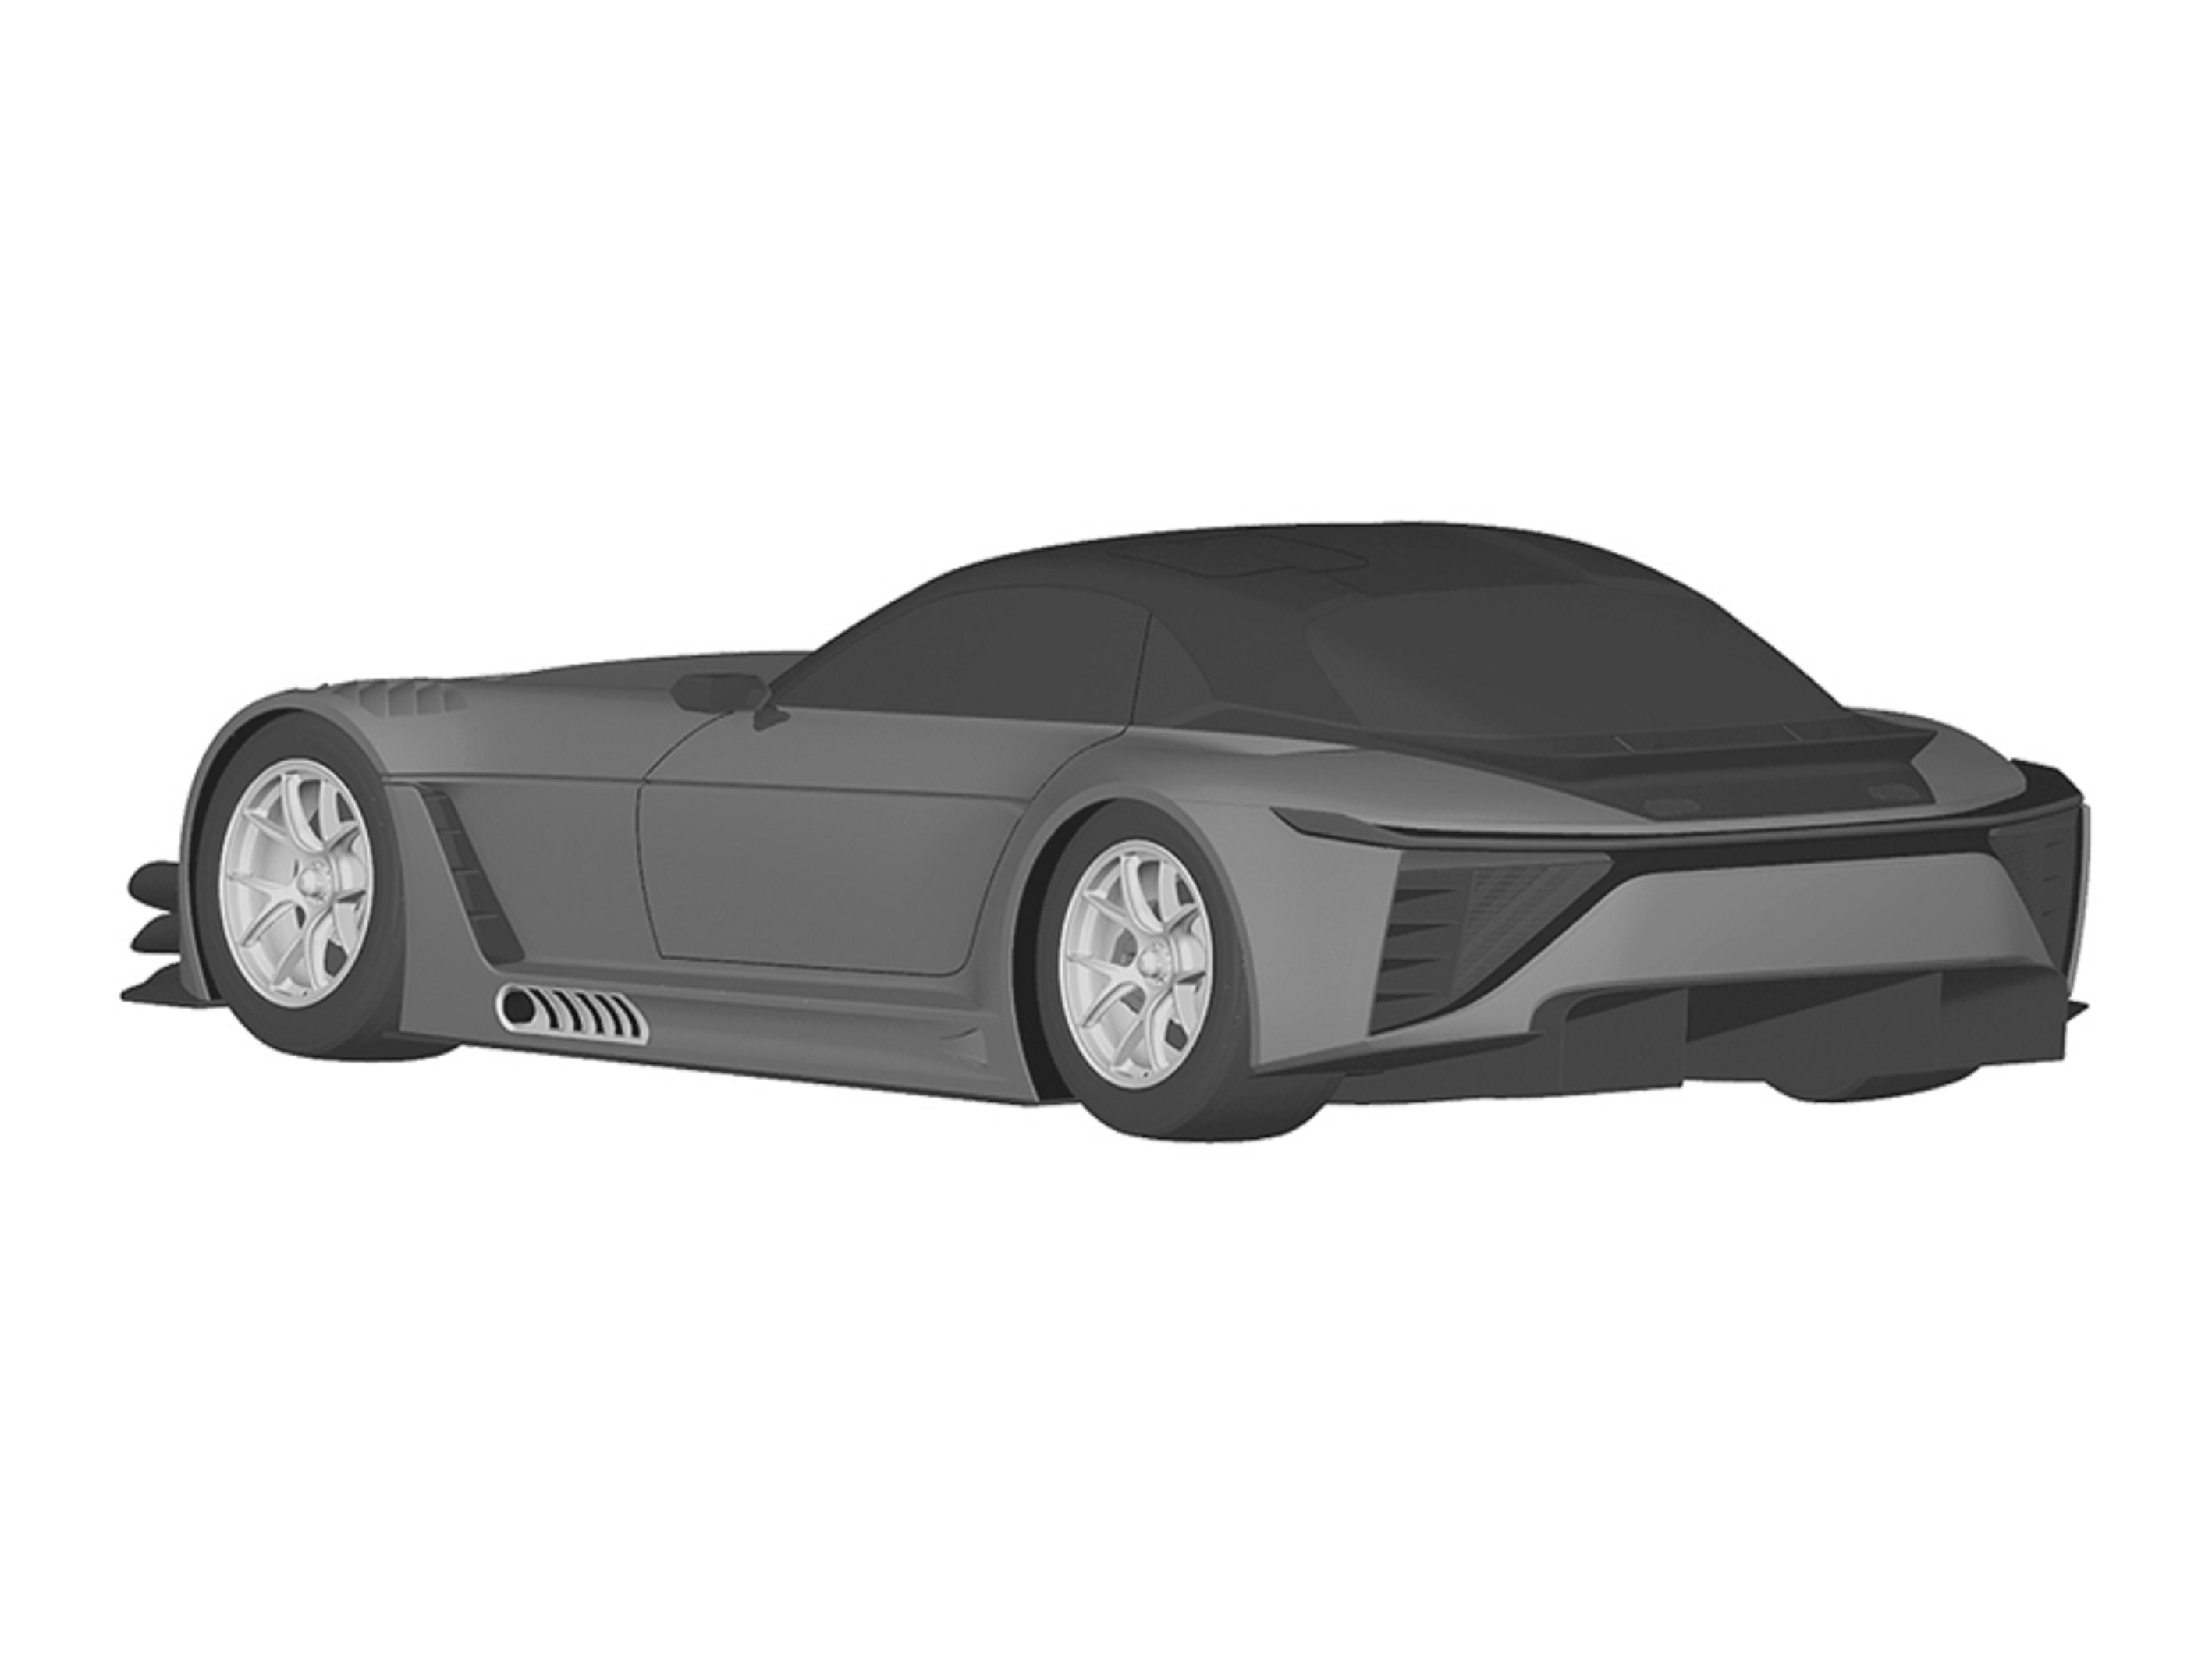 The rear 3/4 view image of a Toyota GT GR3 from a Toyota patent